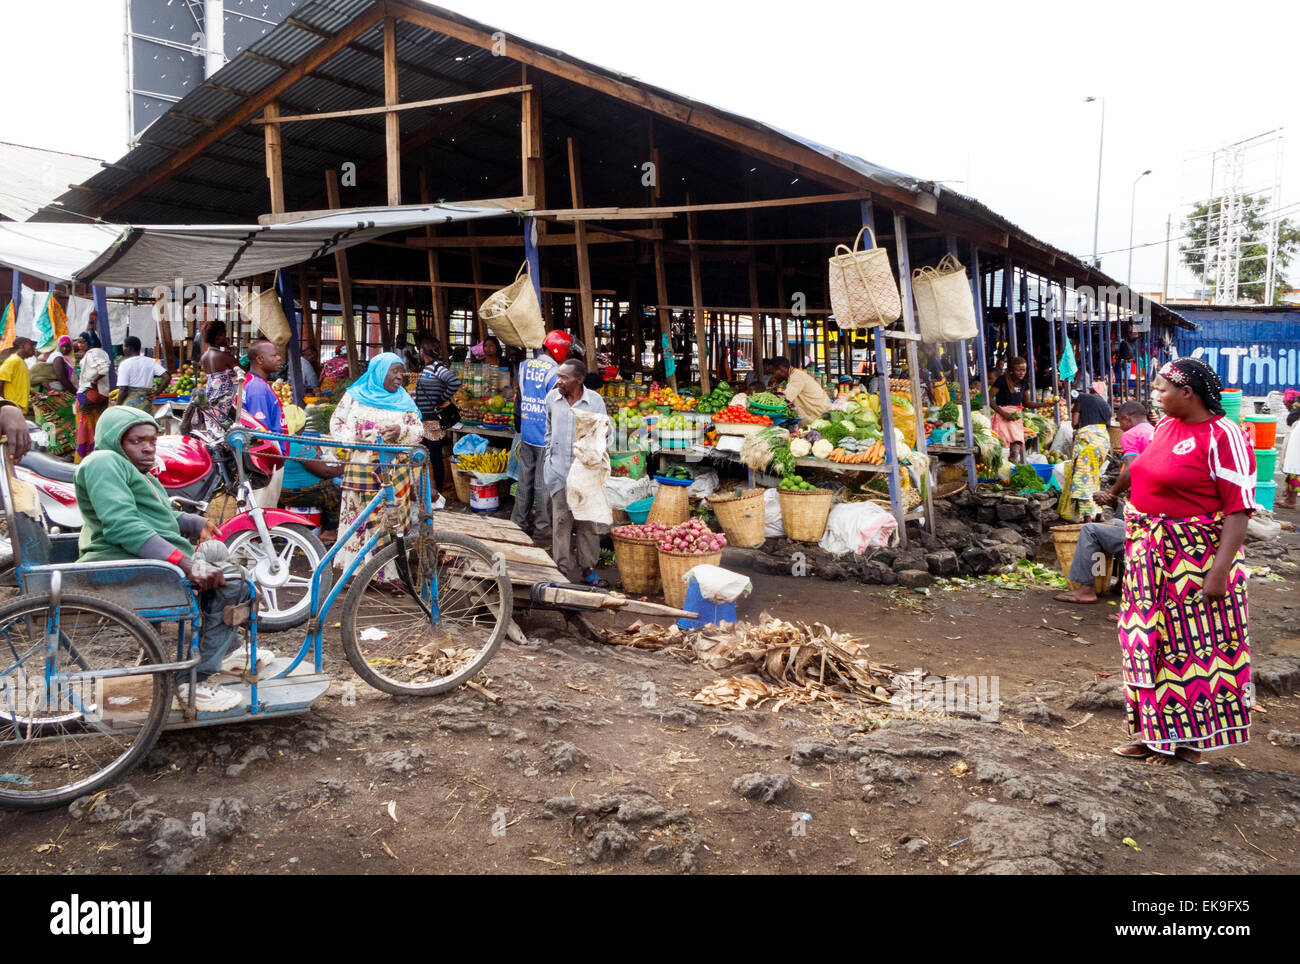 African market scene in the Congolese town of Goma, North Kivu province, Democratic Republic of Congo ( DRC ), Africa Stock Photo